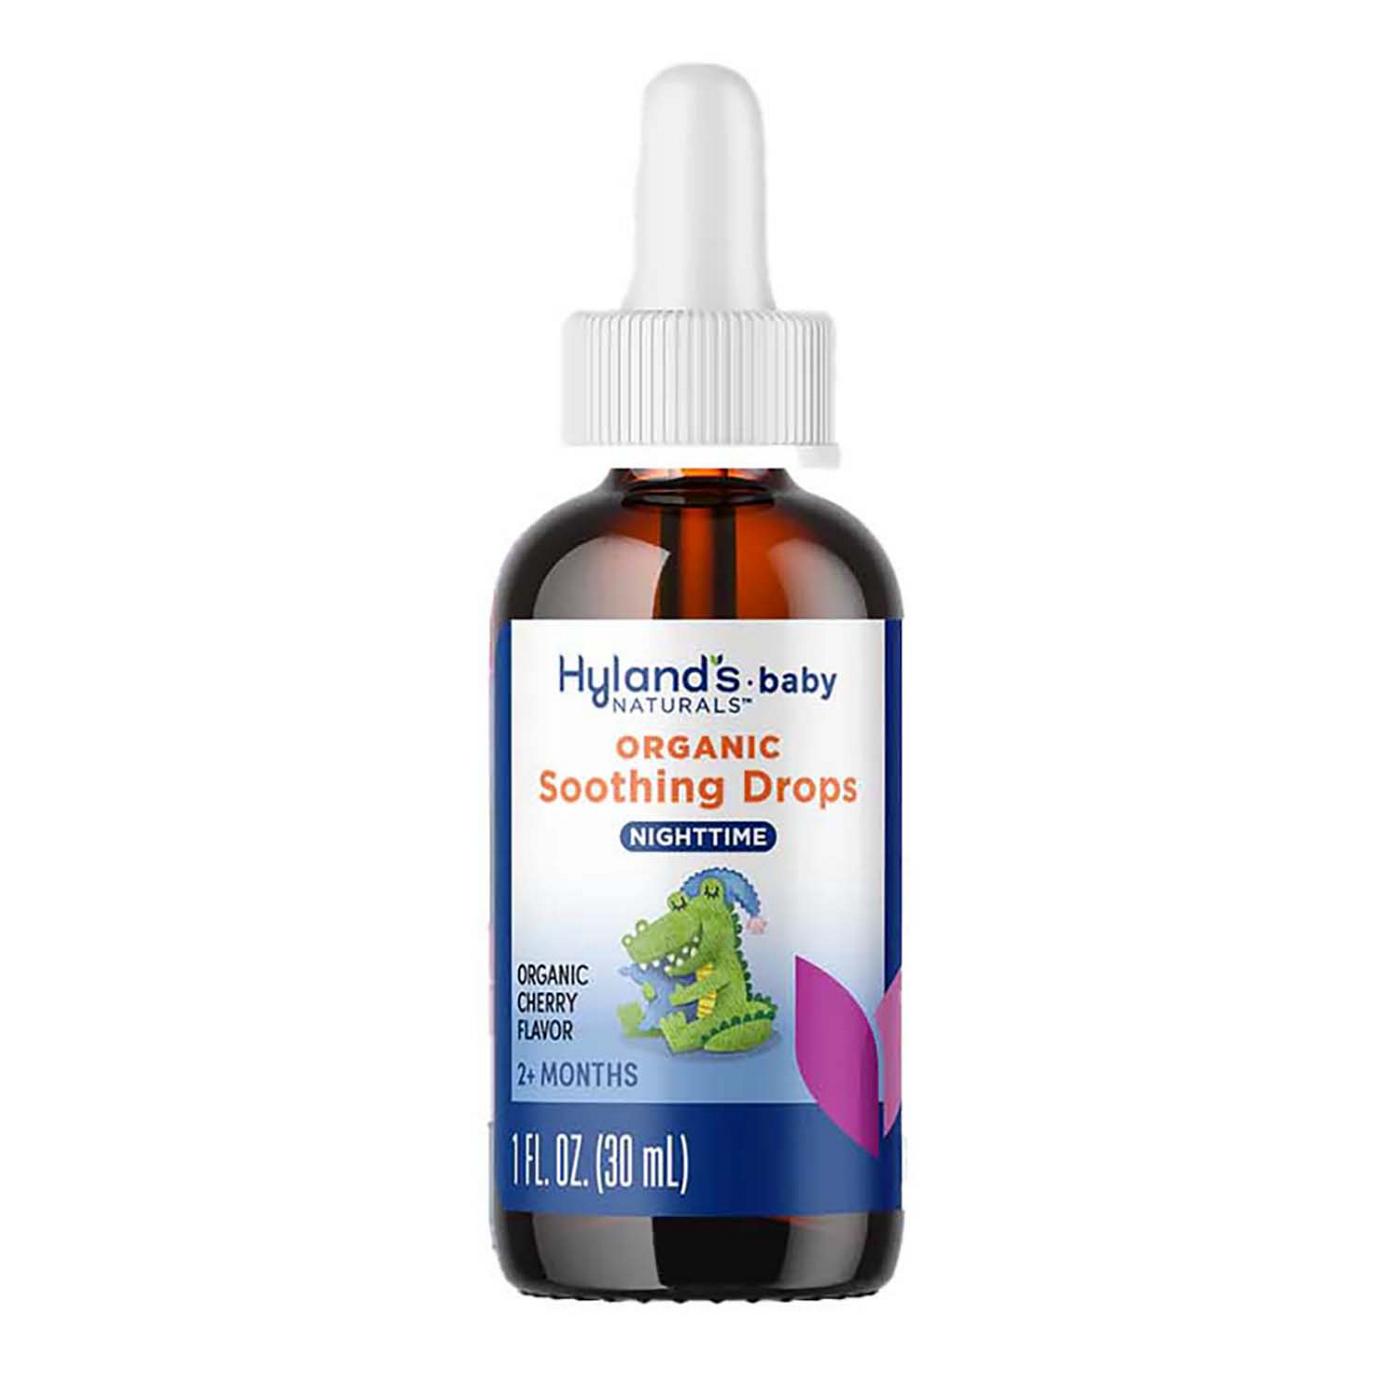 Hyland's Naturals Baby Organic Soothing Drops Nighttime - Cherry; image 3 of 3